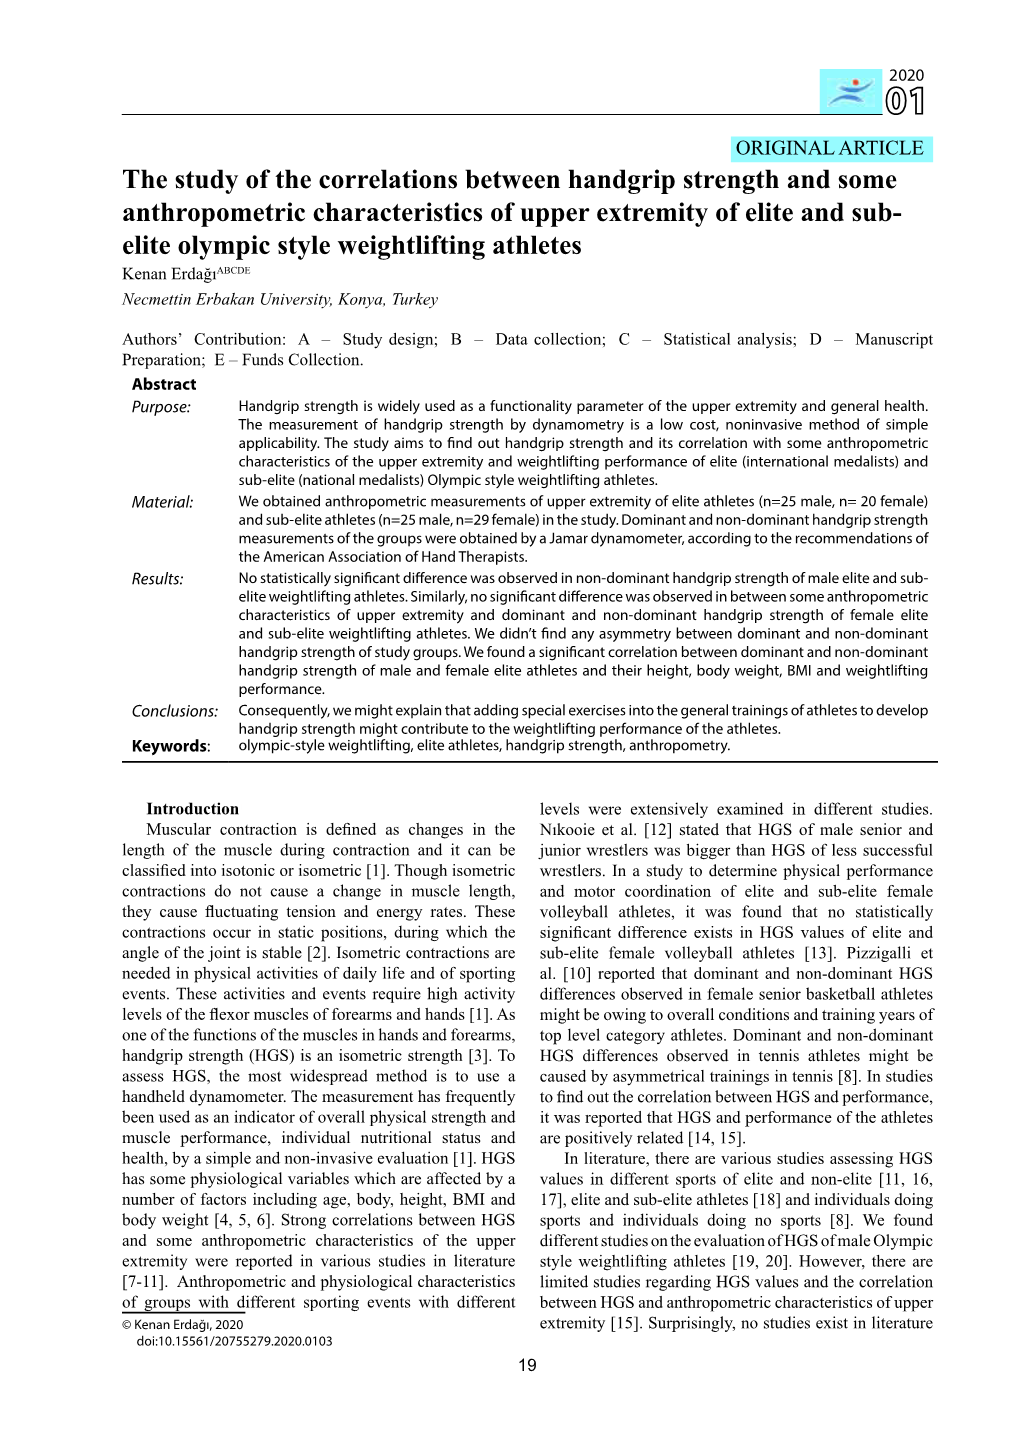 The Study of the Correlations Between Handgrip Strength and Some